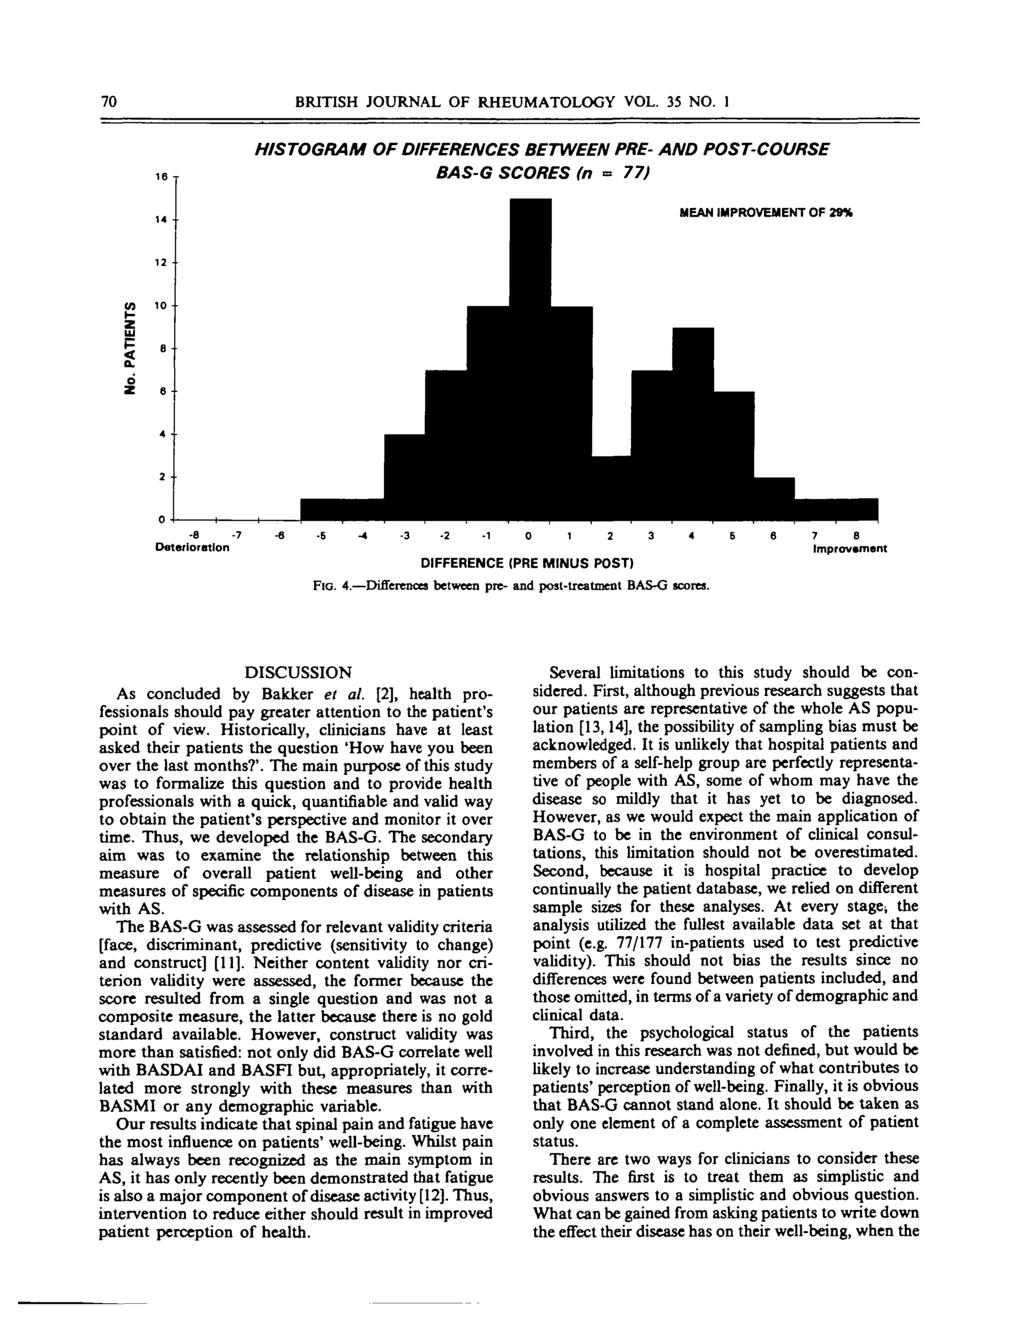 70 BRITISH JOURNAL OF RHEUMATOLOGY VOL. 35 NO. 1 HISTOGRAM OF DIFFERENCES BETWEEN PRE- AND POST-COURSE BAS-G SCORES (n» 77) MEAN IMPROVEMENT OF 29% -a -7 Deterioration DIFFERENCE (PRE MINUS POST) FIG.